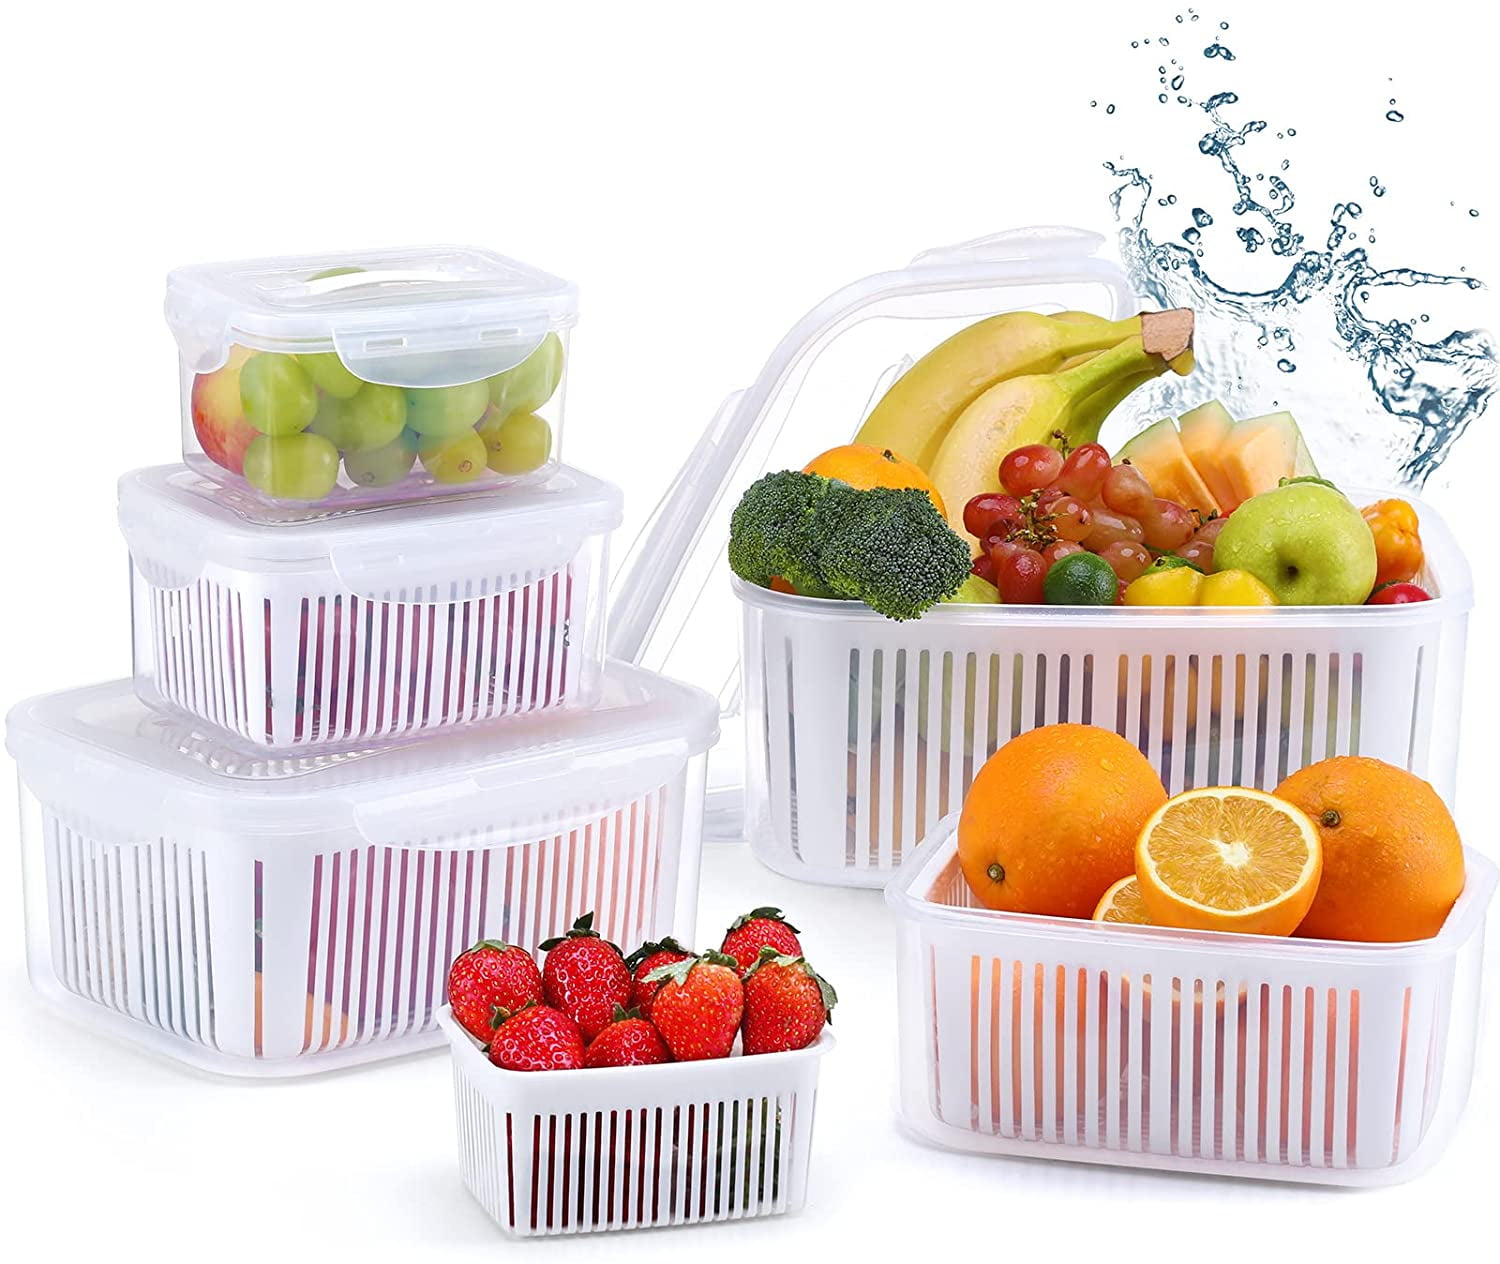 MsPrLs Fruit Storage Containers for Fridge 5 Pack | Fruits and Veggie Containers for Refrigerator with Colander | Keep Produce Vegetables Lettuce